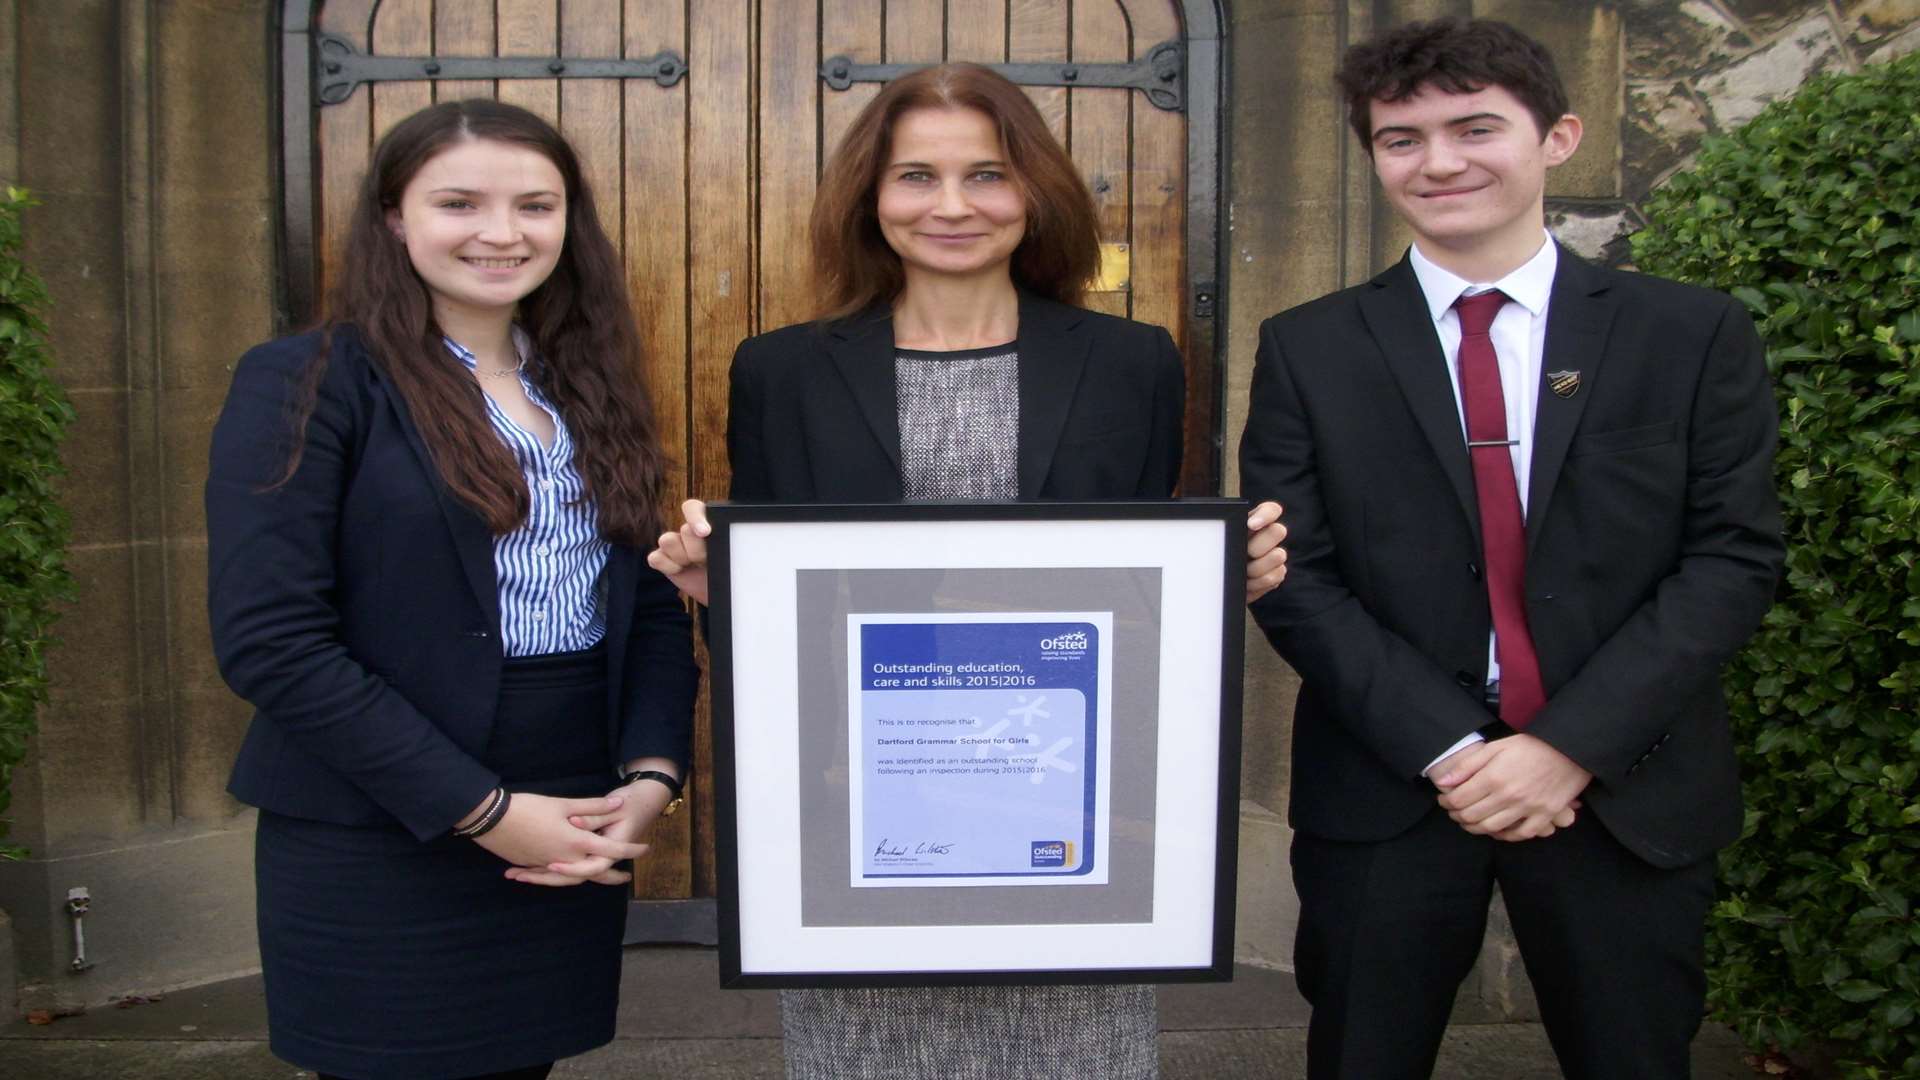 Head students Emily Garry, 17, and Patrick Ryan, 17, with head teacher Sharon Pritchard.